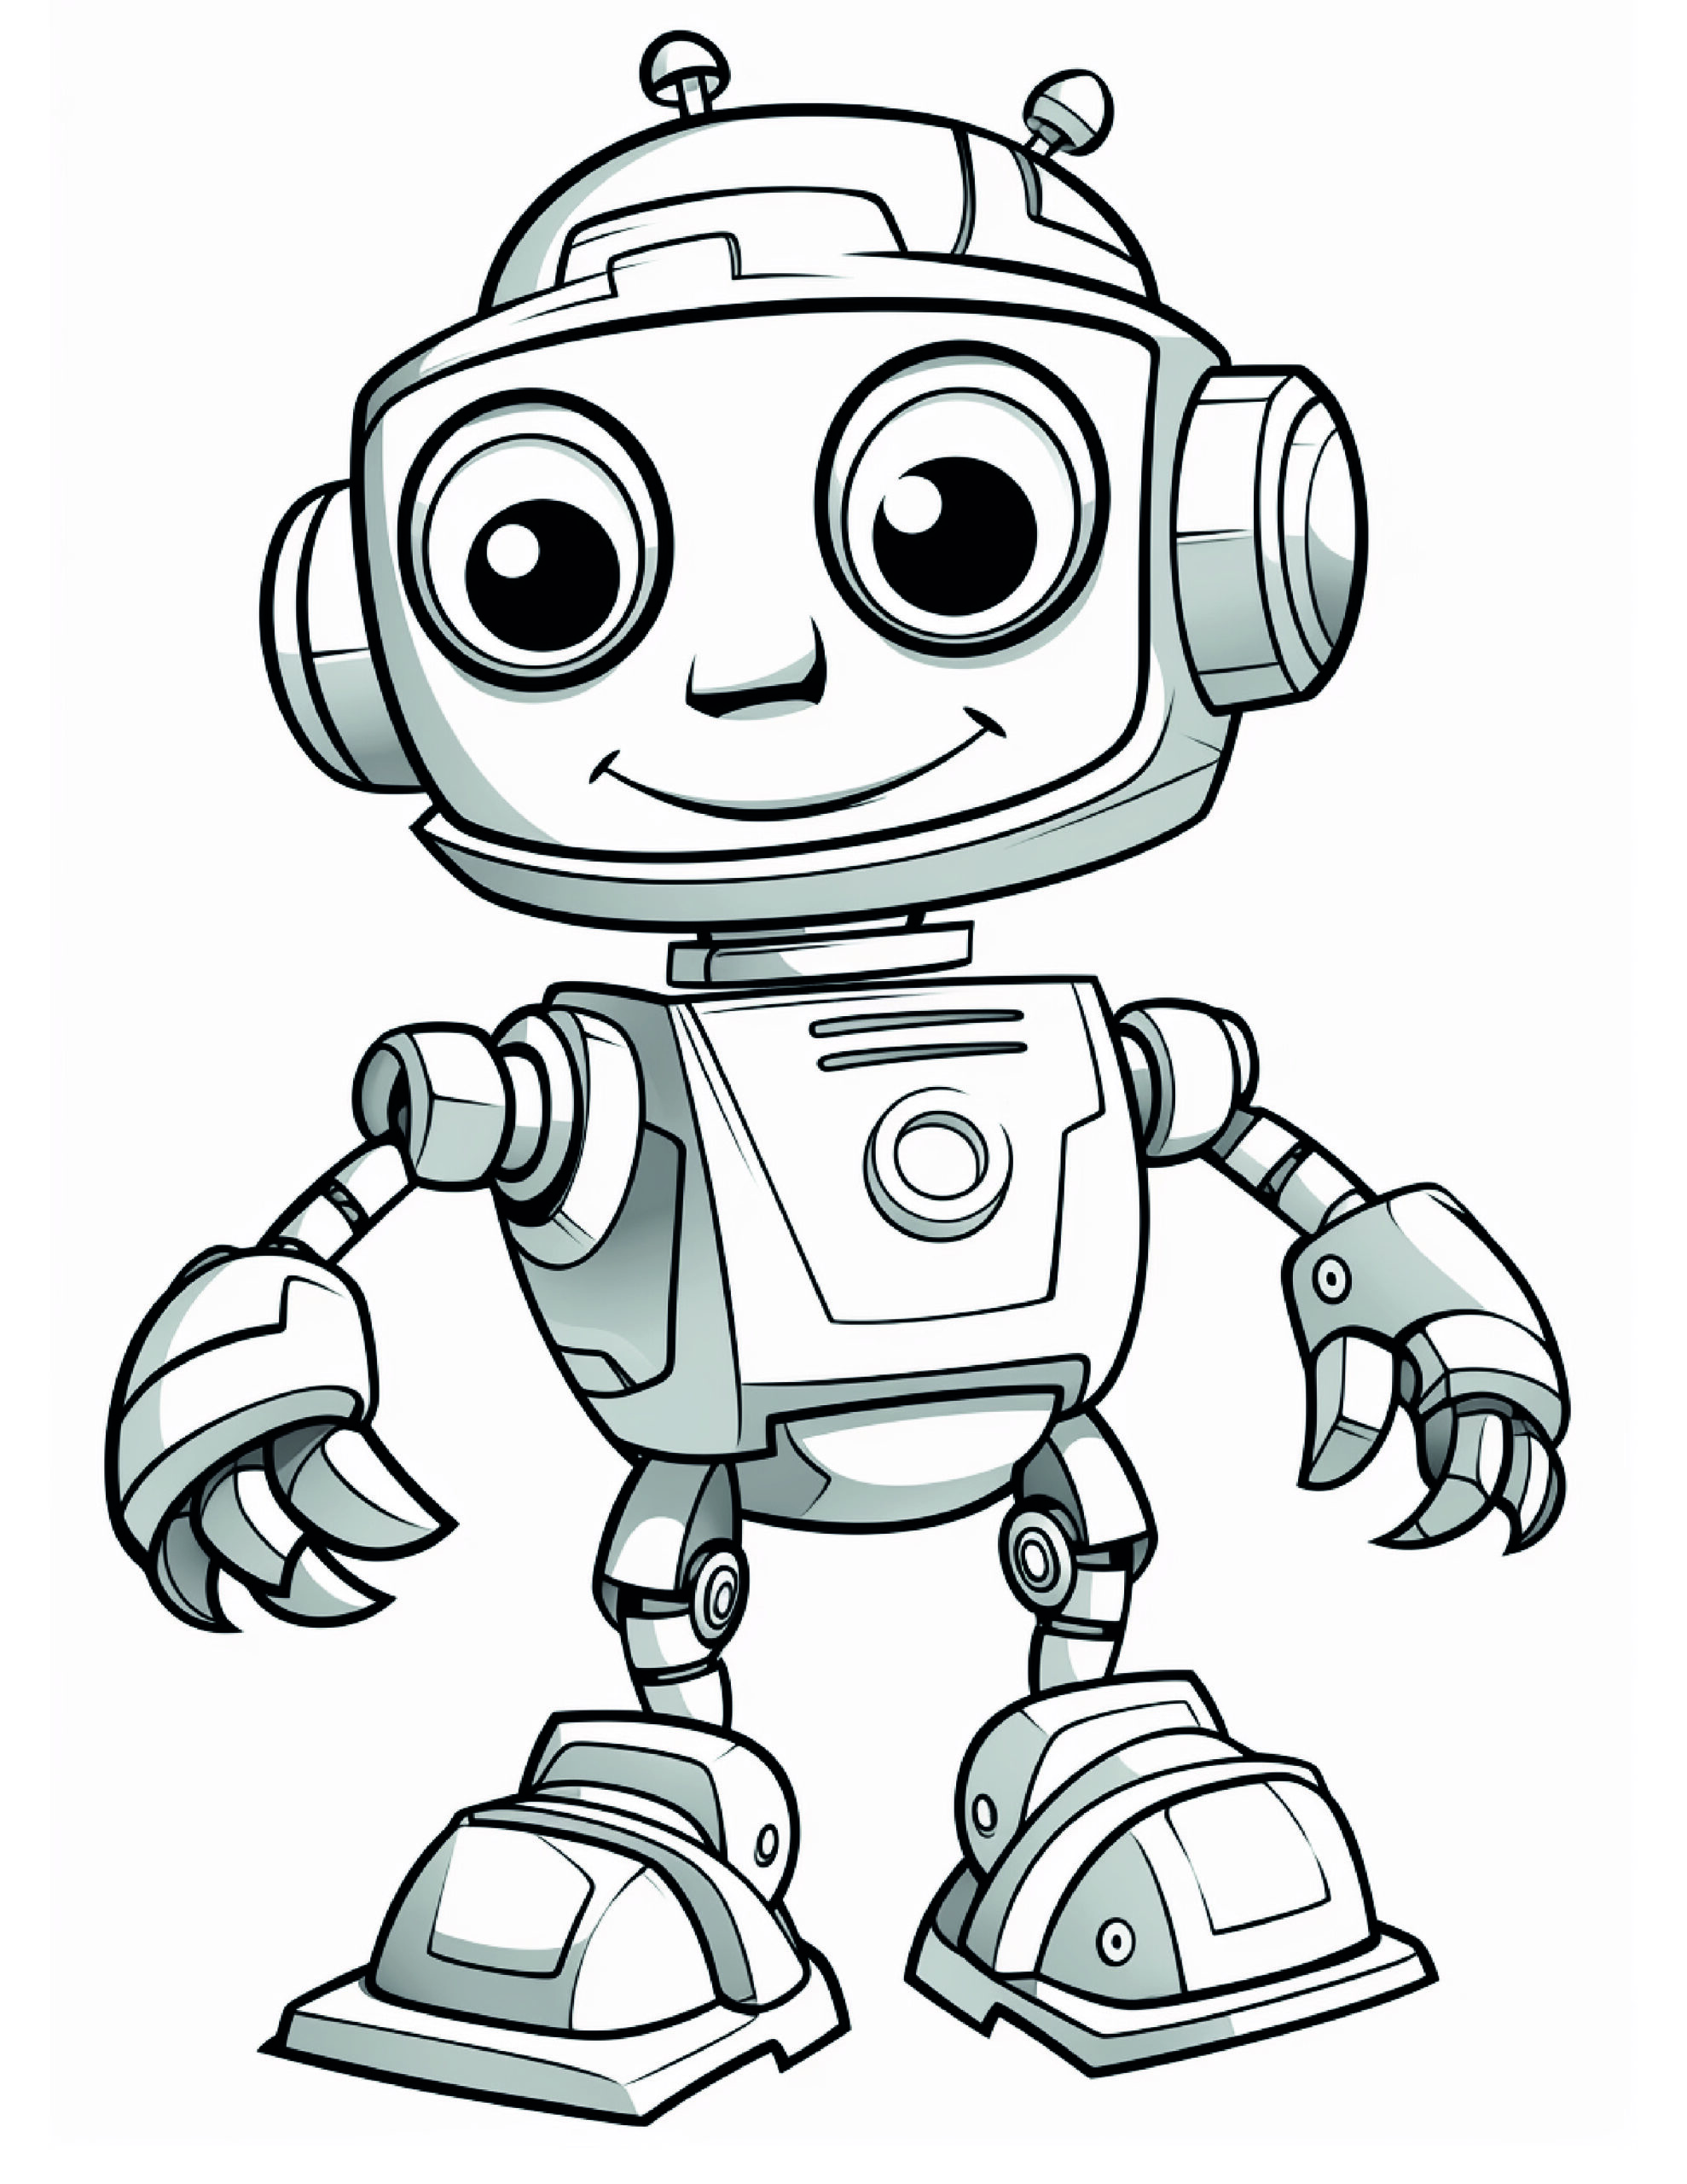 Robot Coloring Page 9 - A line drawing of a smiling robot. 